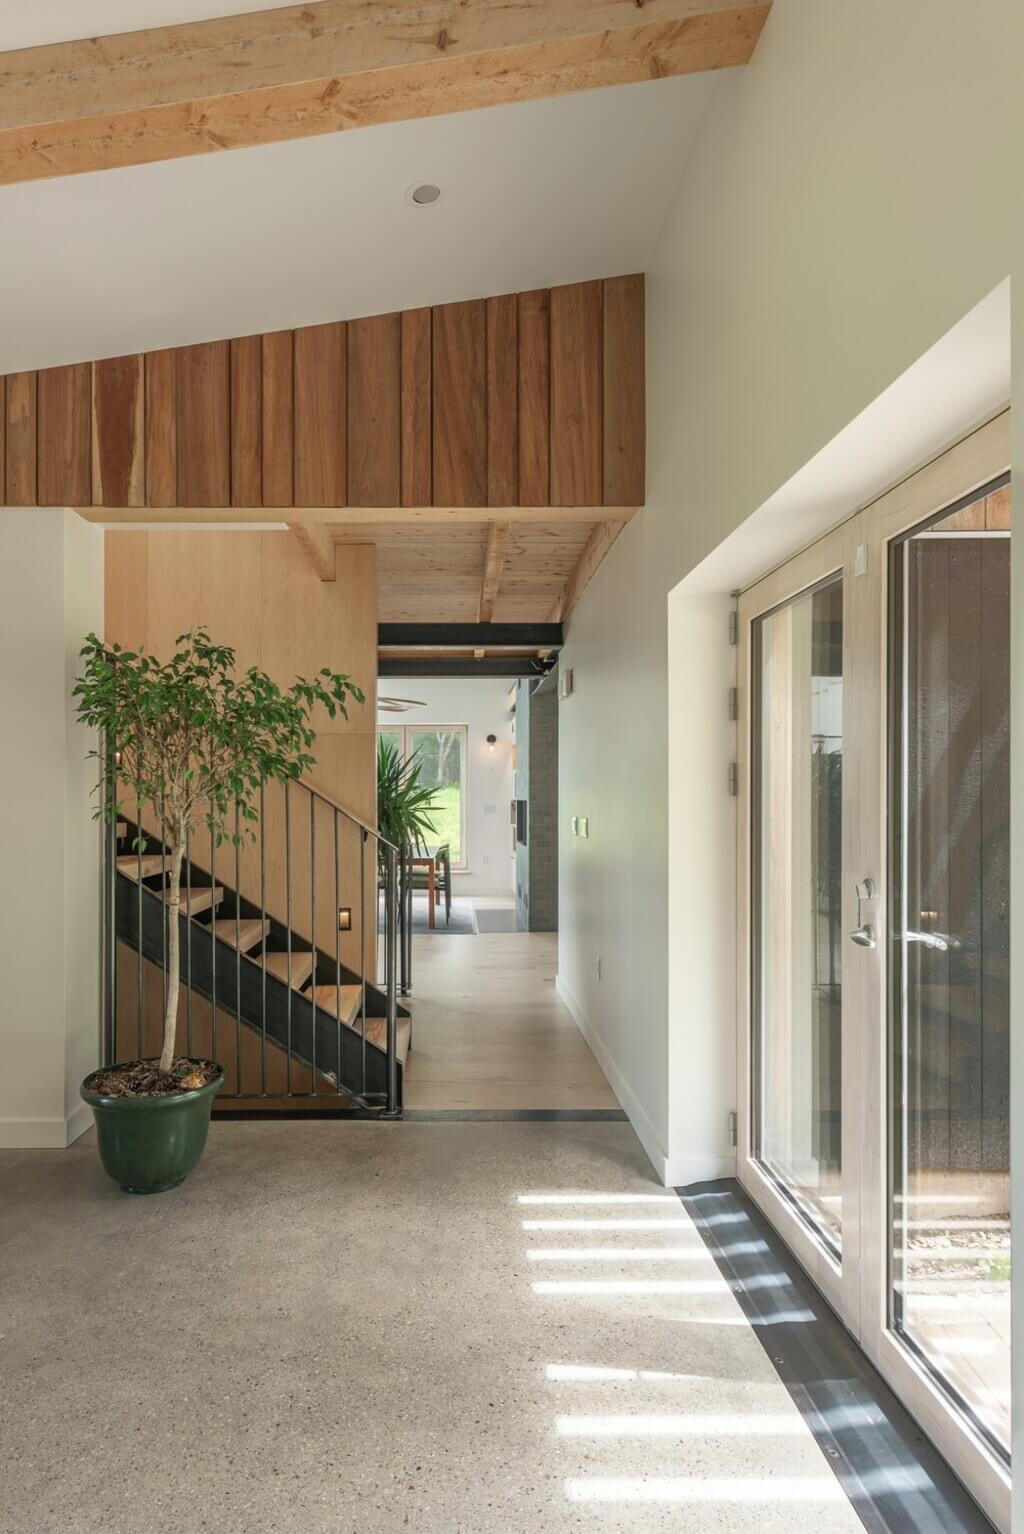 Two Rocks House Habit Studio long hallway with a plant in a pot next to a stair case
